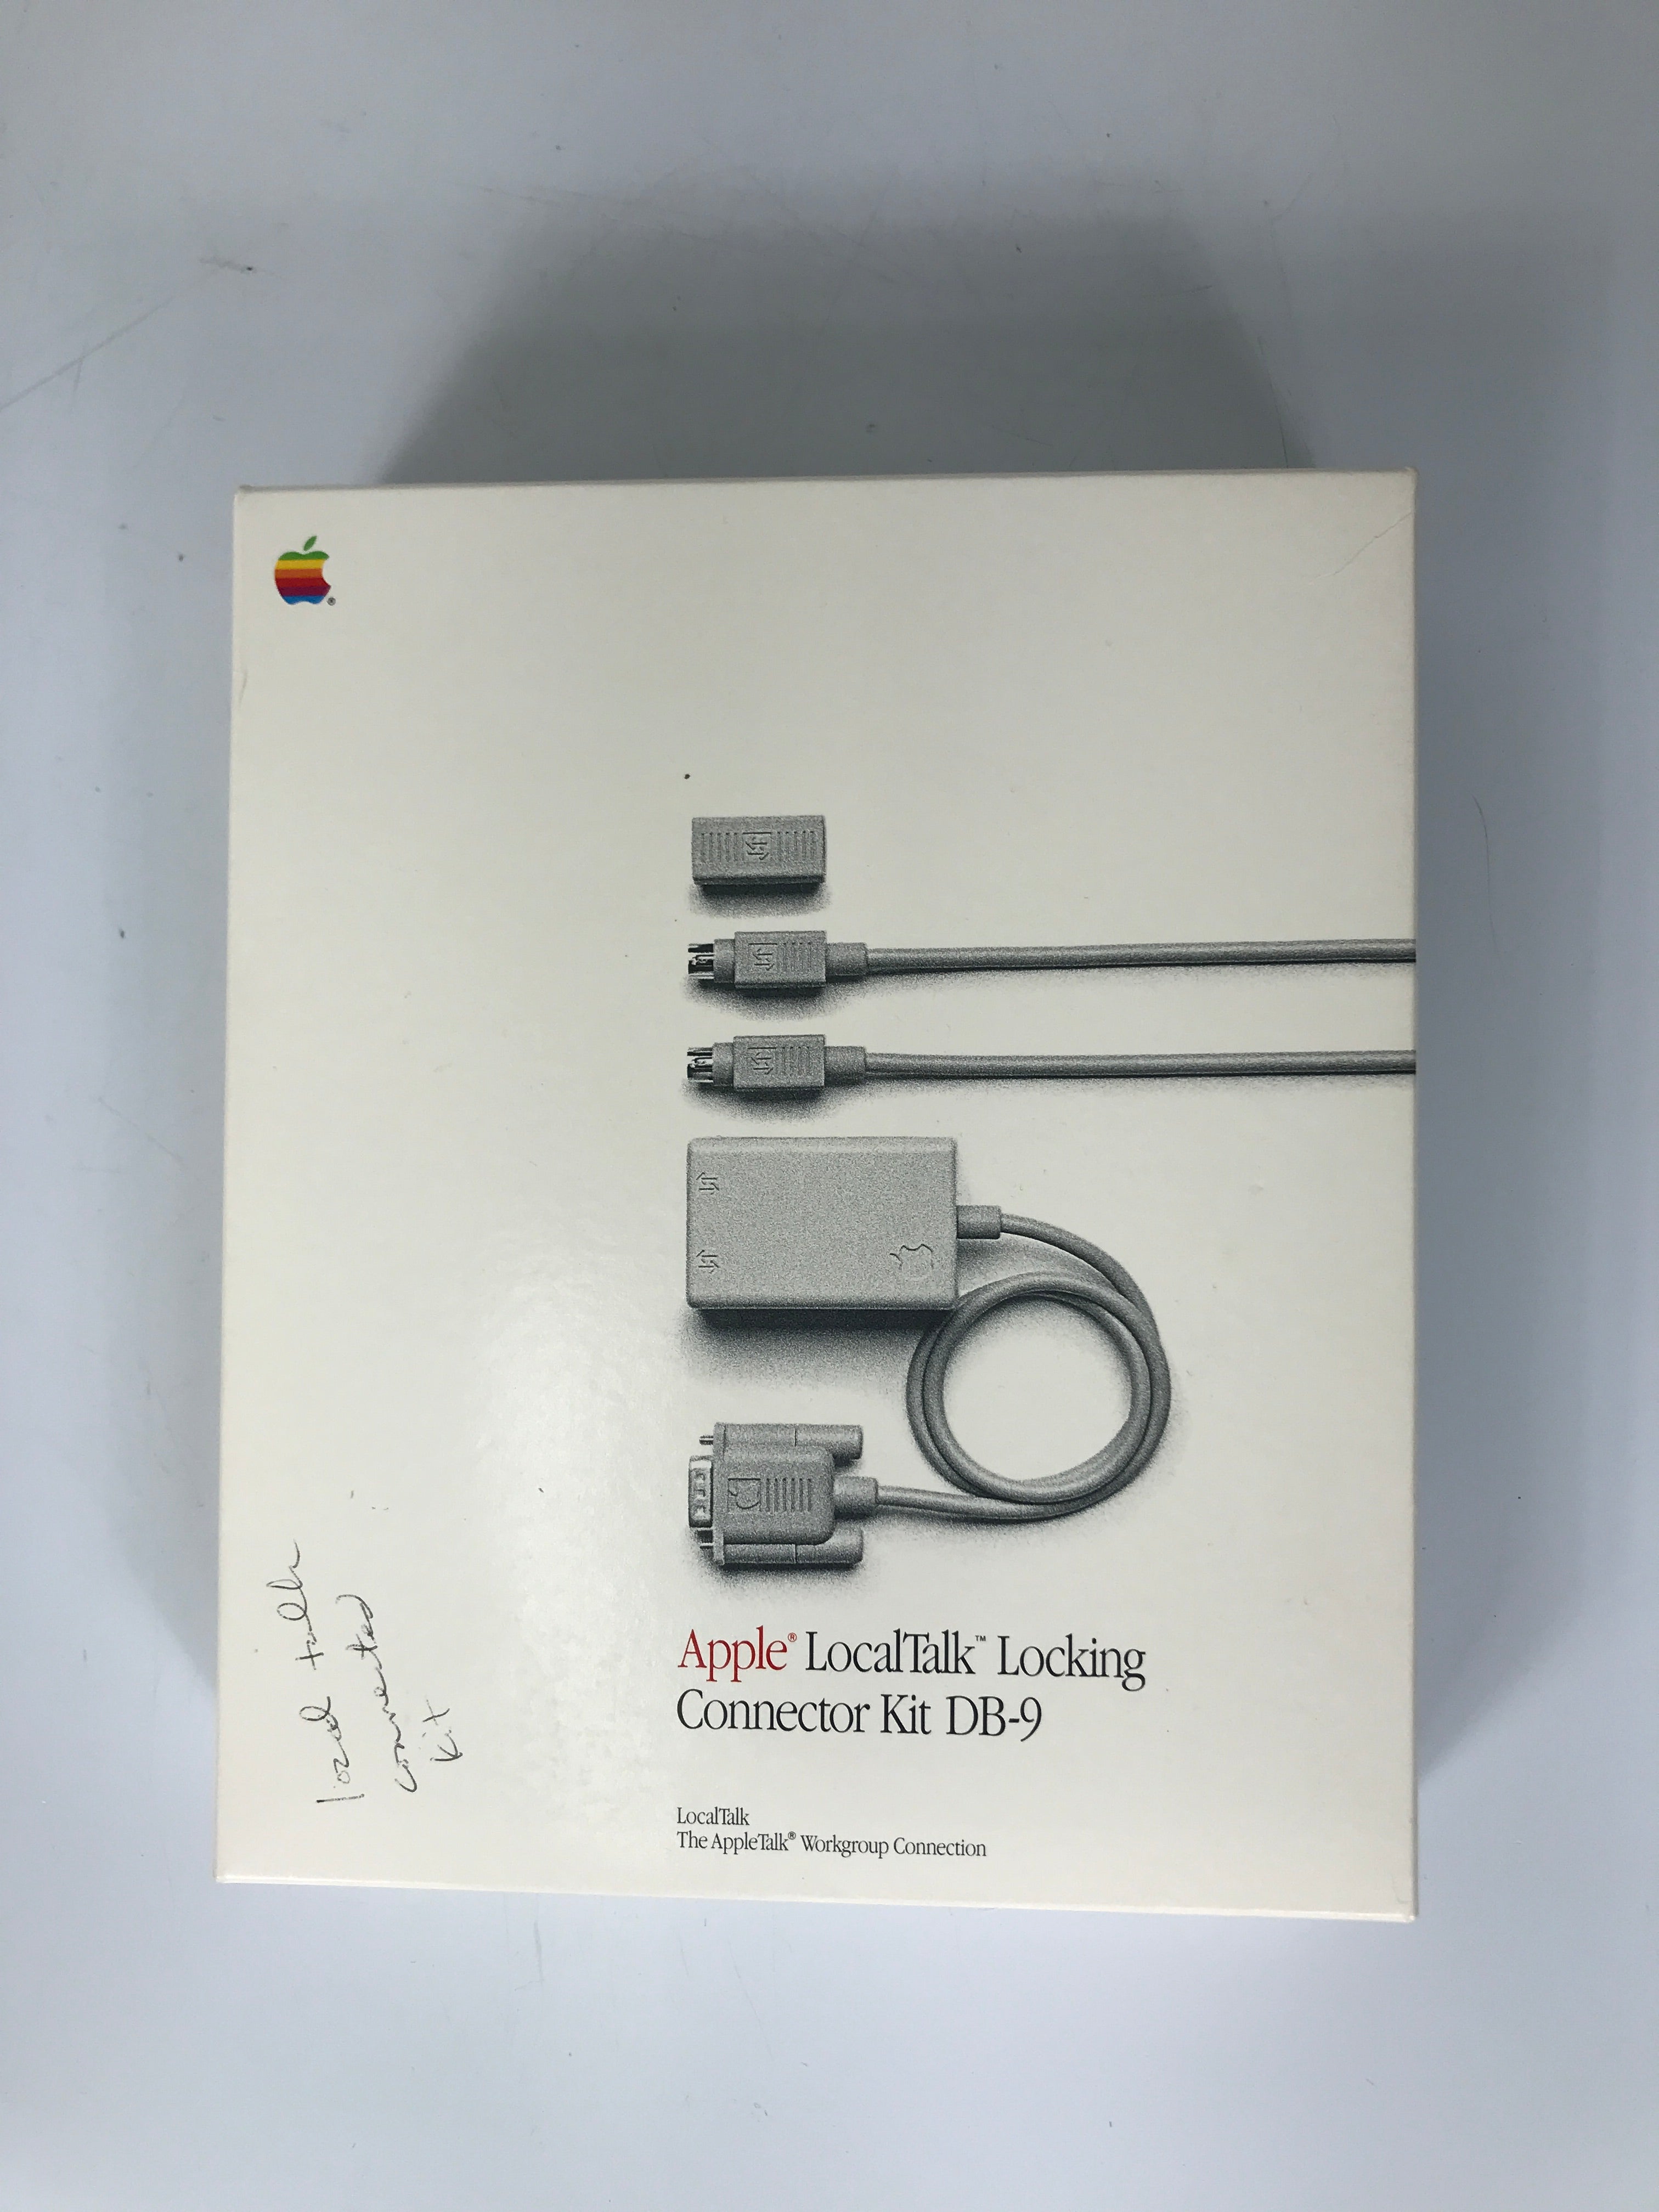 Apple LocalTalk Locking Connector Kit DB-9 *With Stickers*